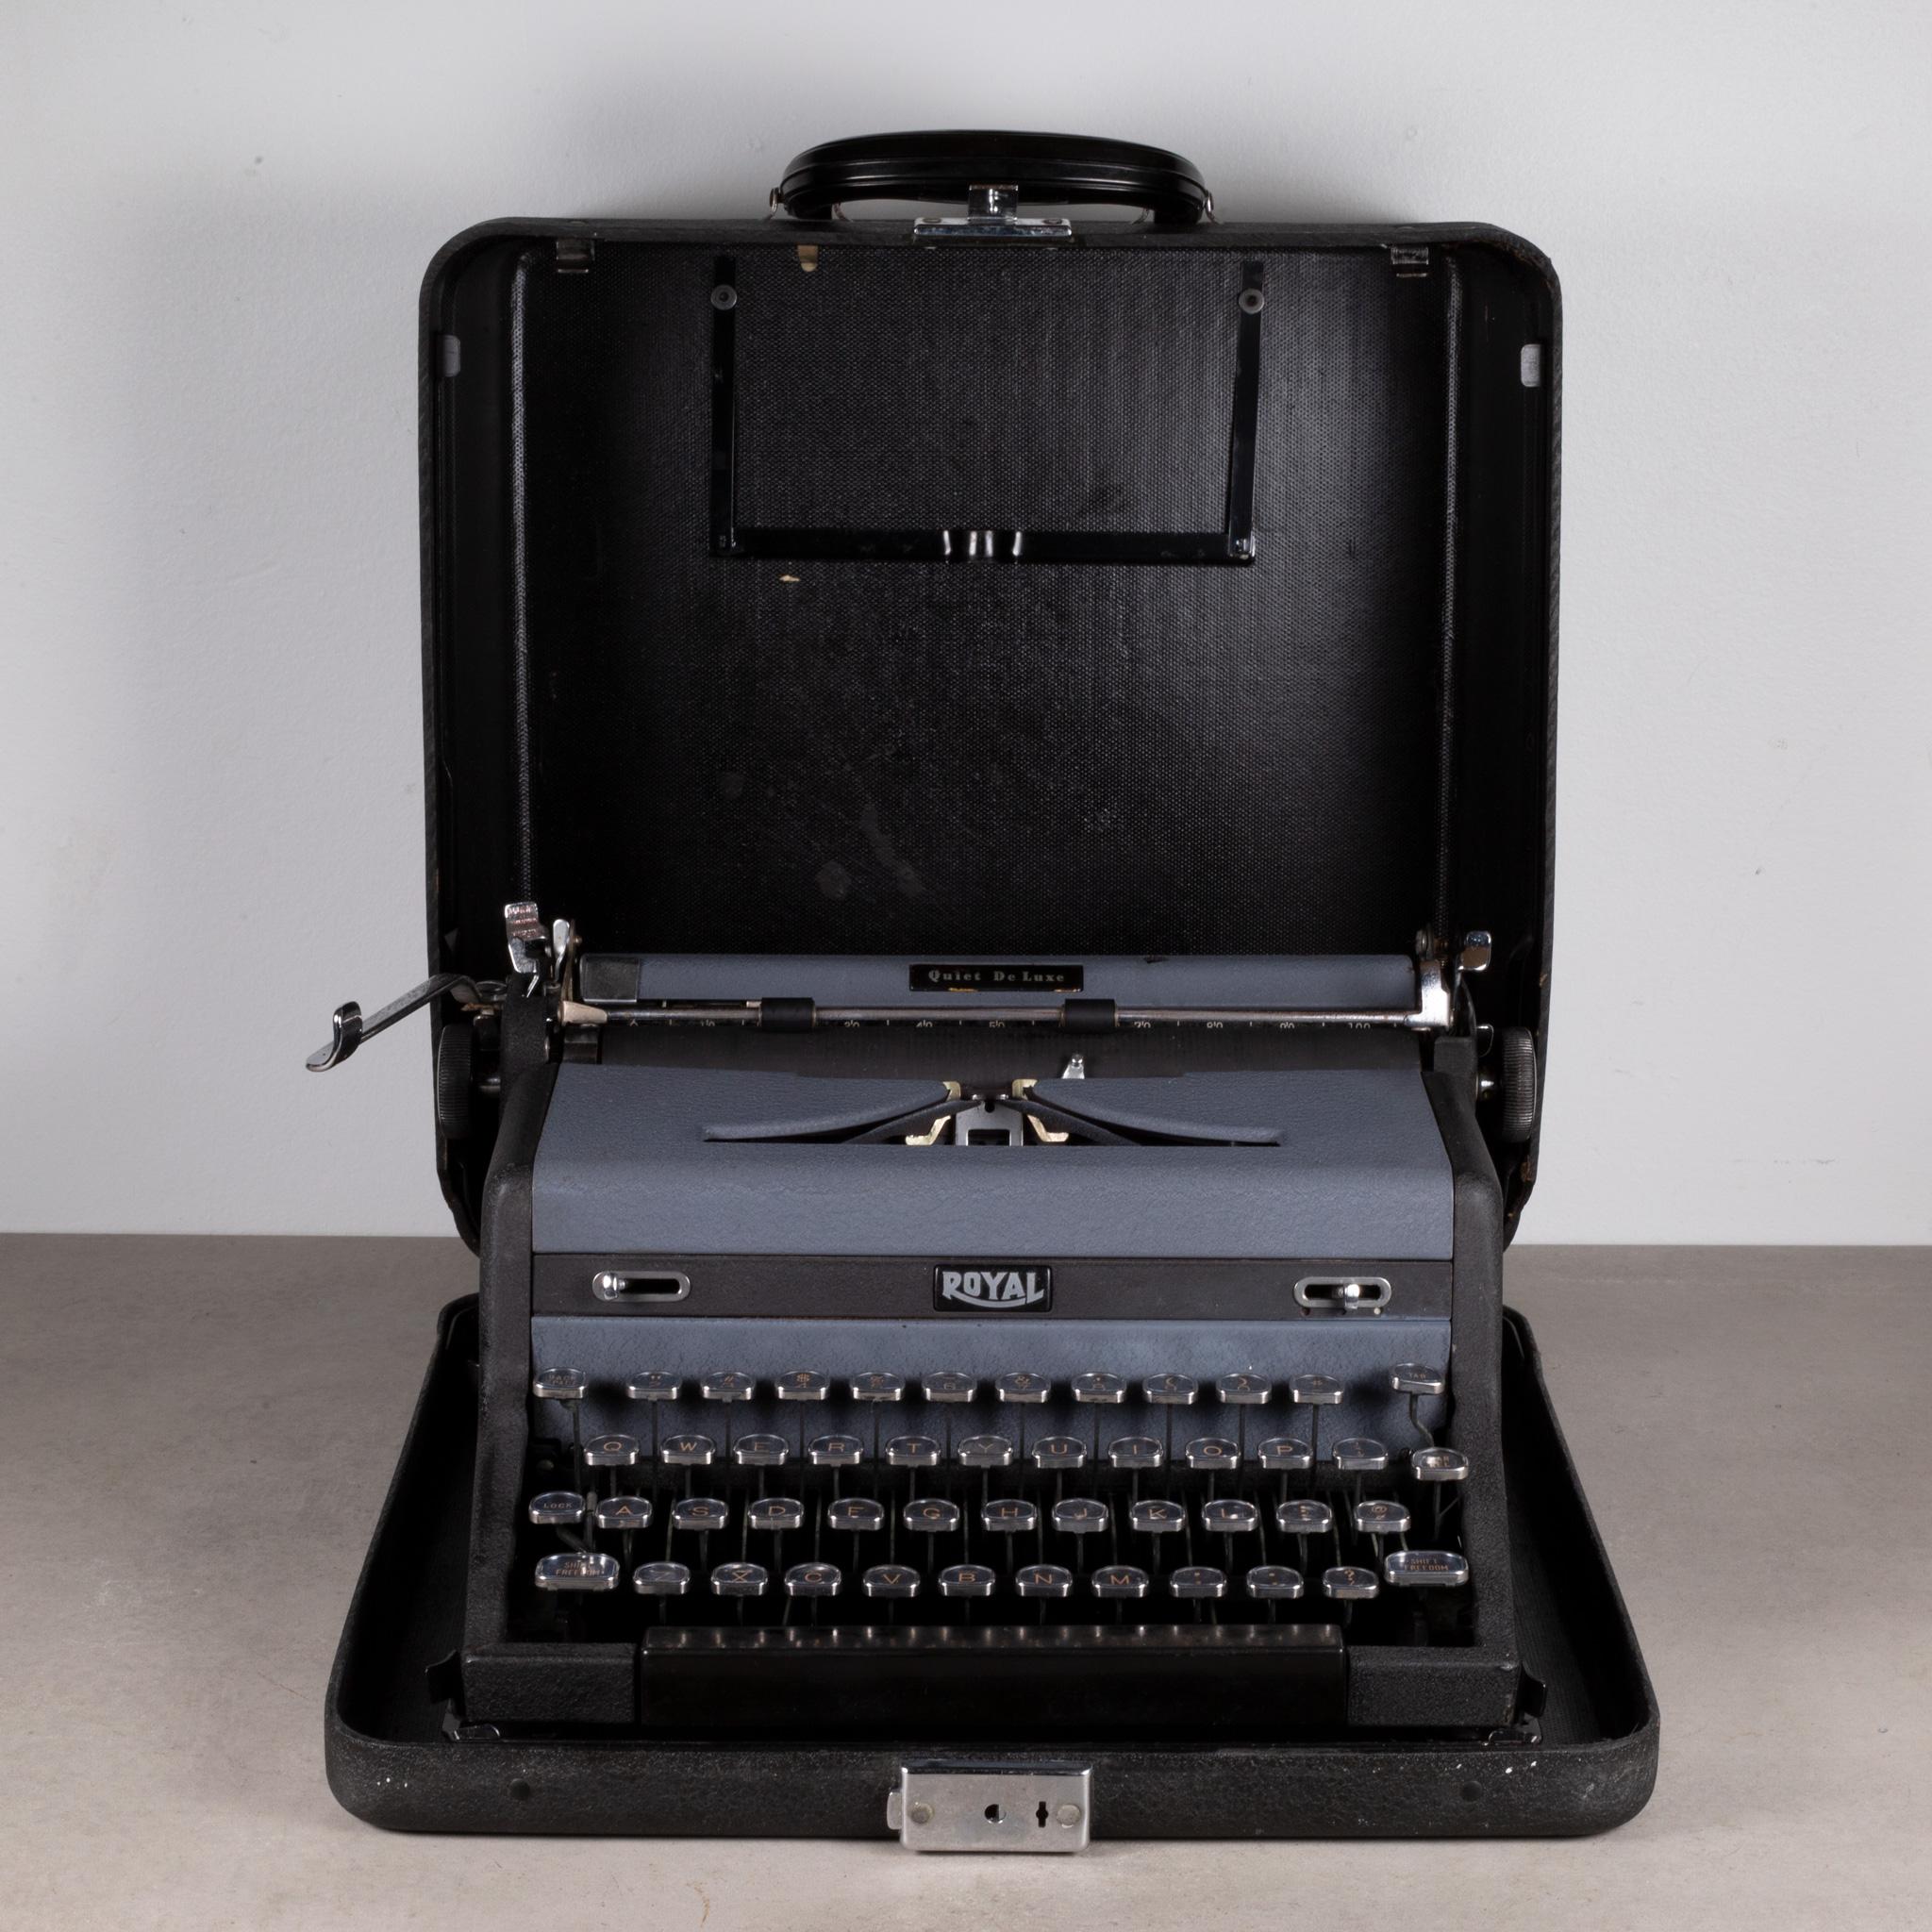 About

A vintage Royal Quiet DeLuxe typewriter in two tone crinkle finish. Shell re-designed by Henry Dreyfuss, Squared shell, grey and black with oval chrome inserts for front levers. Keytops changed in this typewriter from round glass to